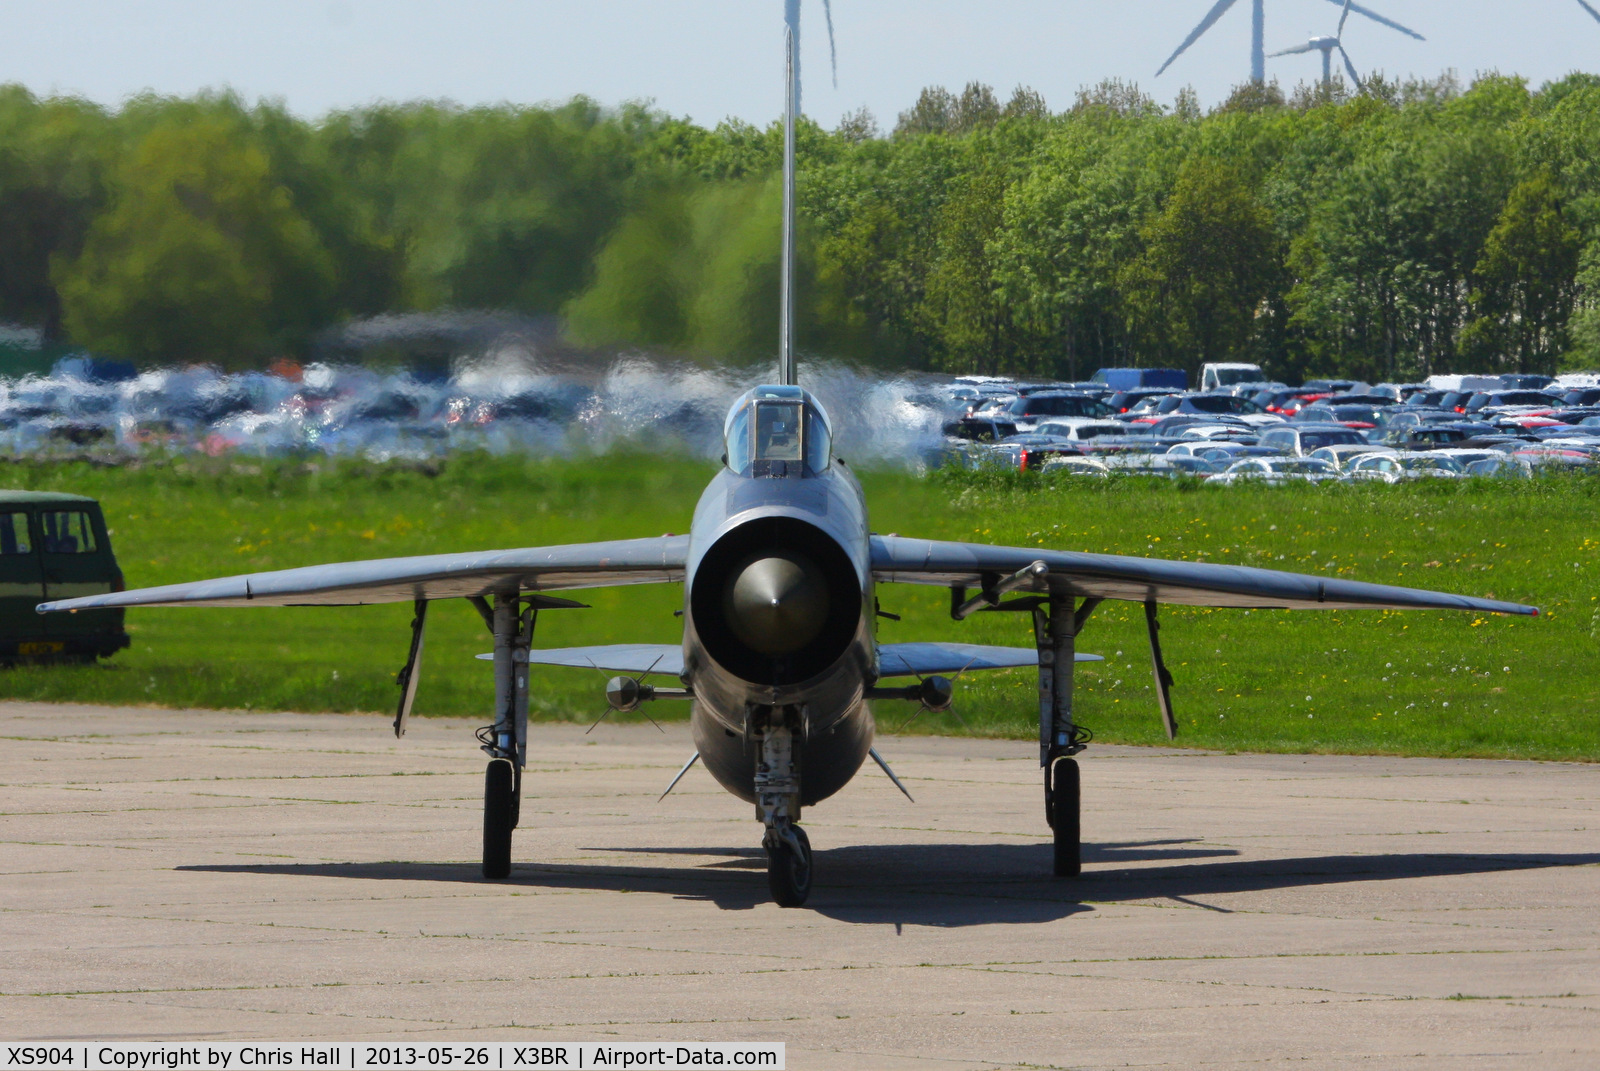 XS904, 1966 English Electric Lightning F.6 C/N 95250, at the Cold War Jets open day, Bruntingthorpe